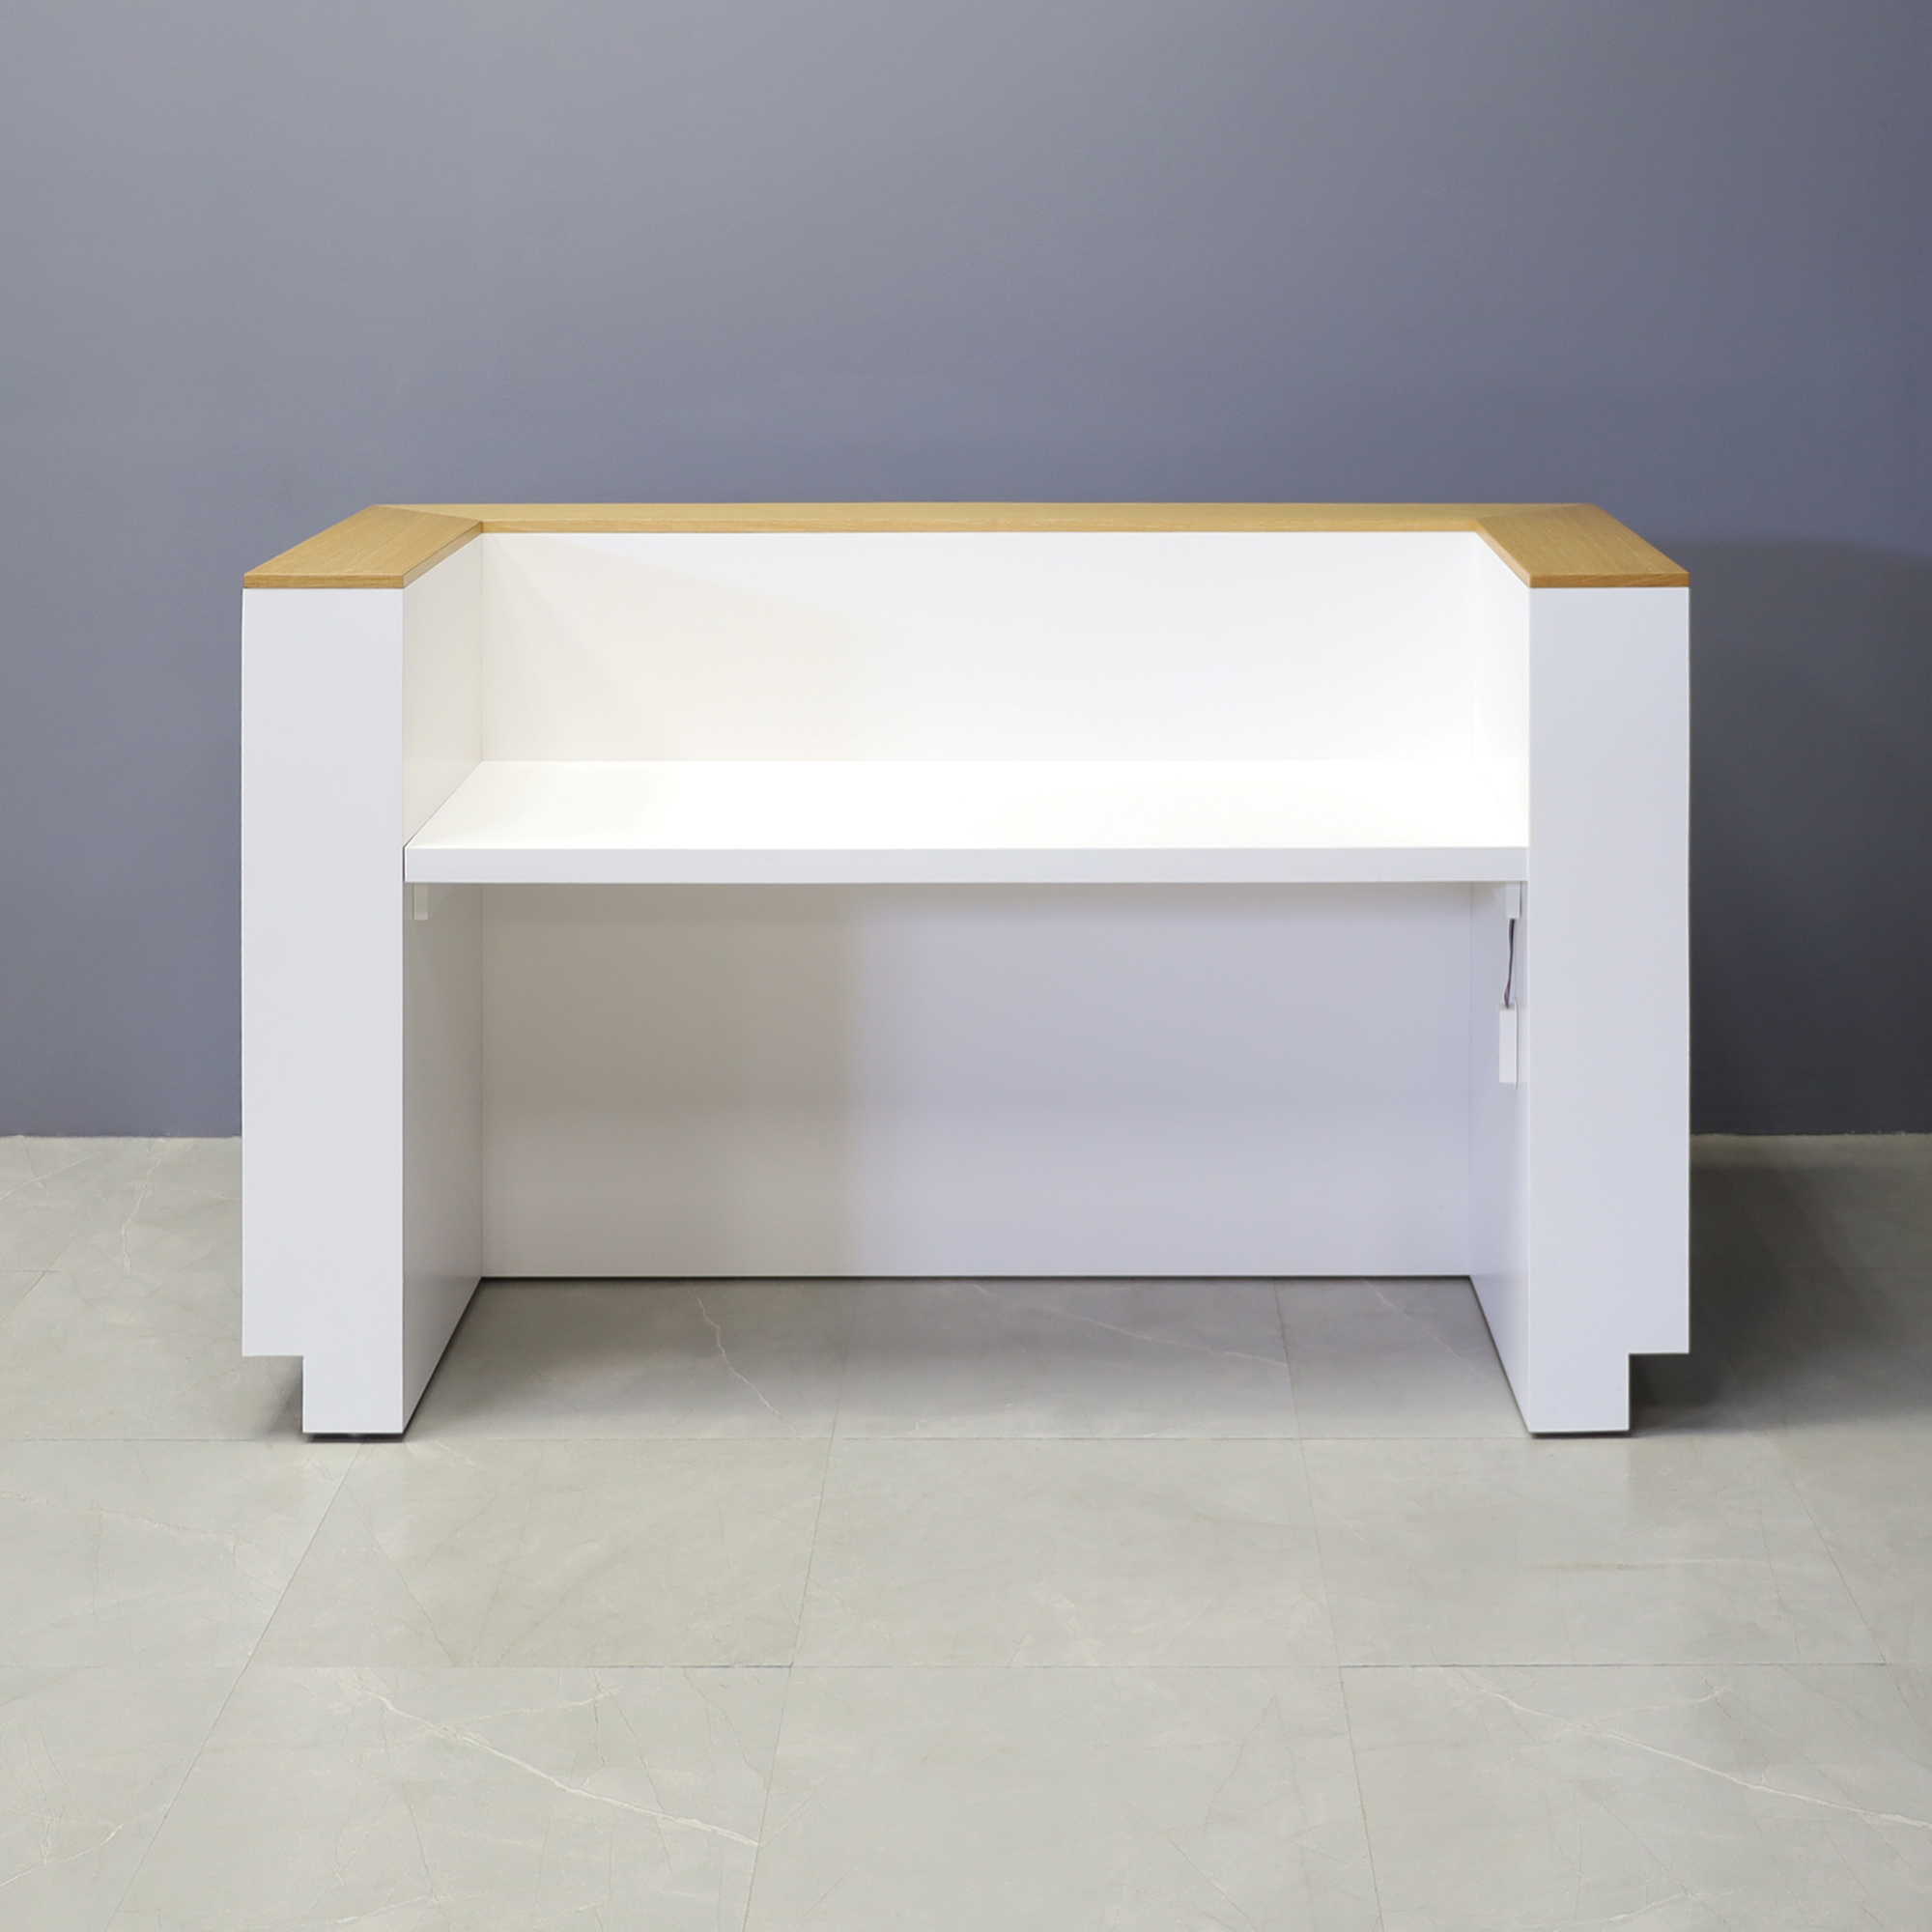 72-inch Manhattan U-Shape Custom Reception Desk in white oak veneer accent panel and top counter, and white matte laminate main desk, with color LED, shown here.